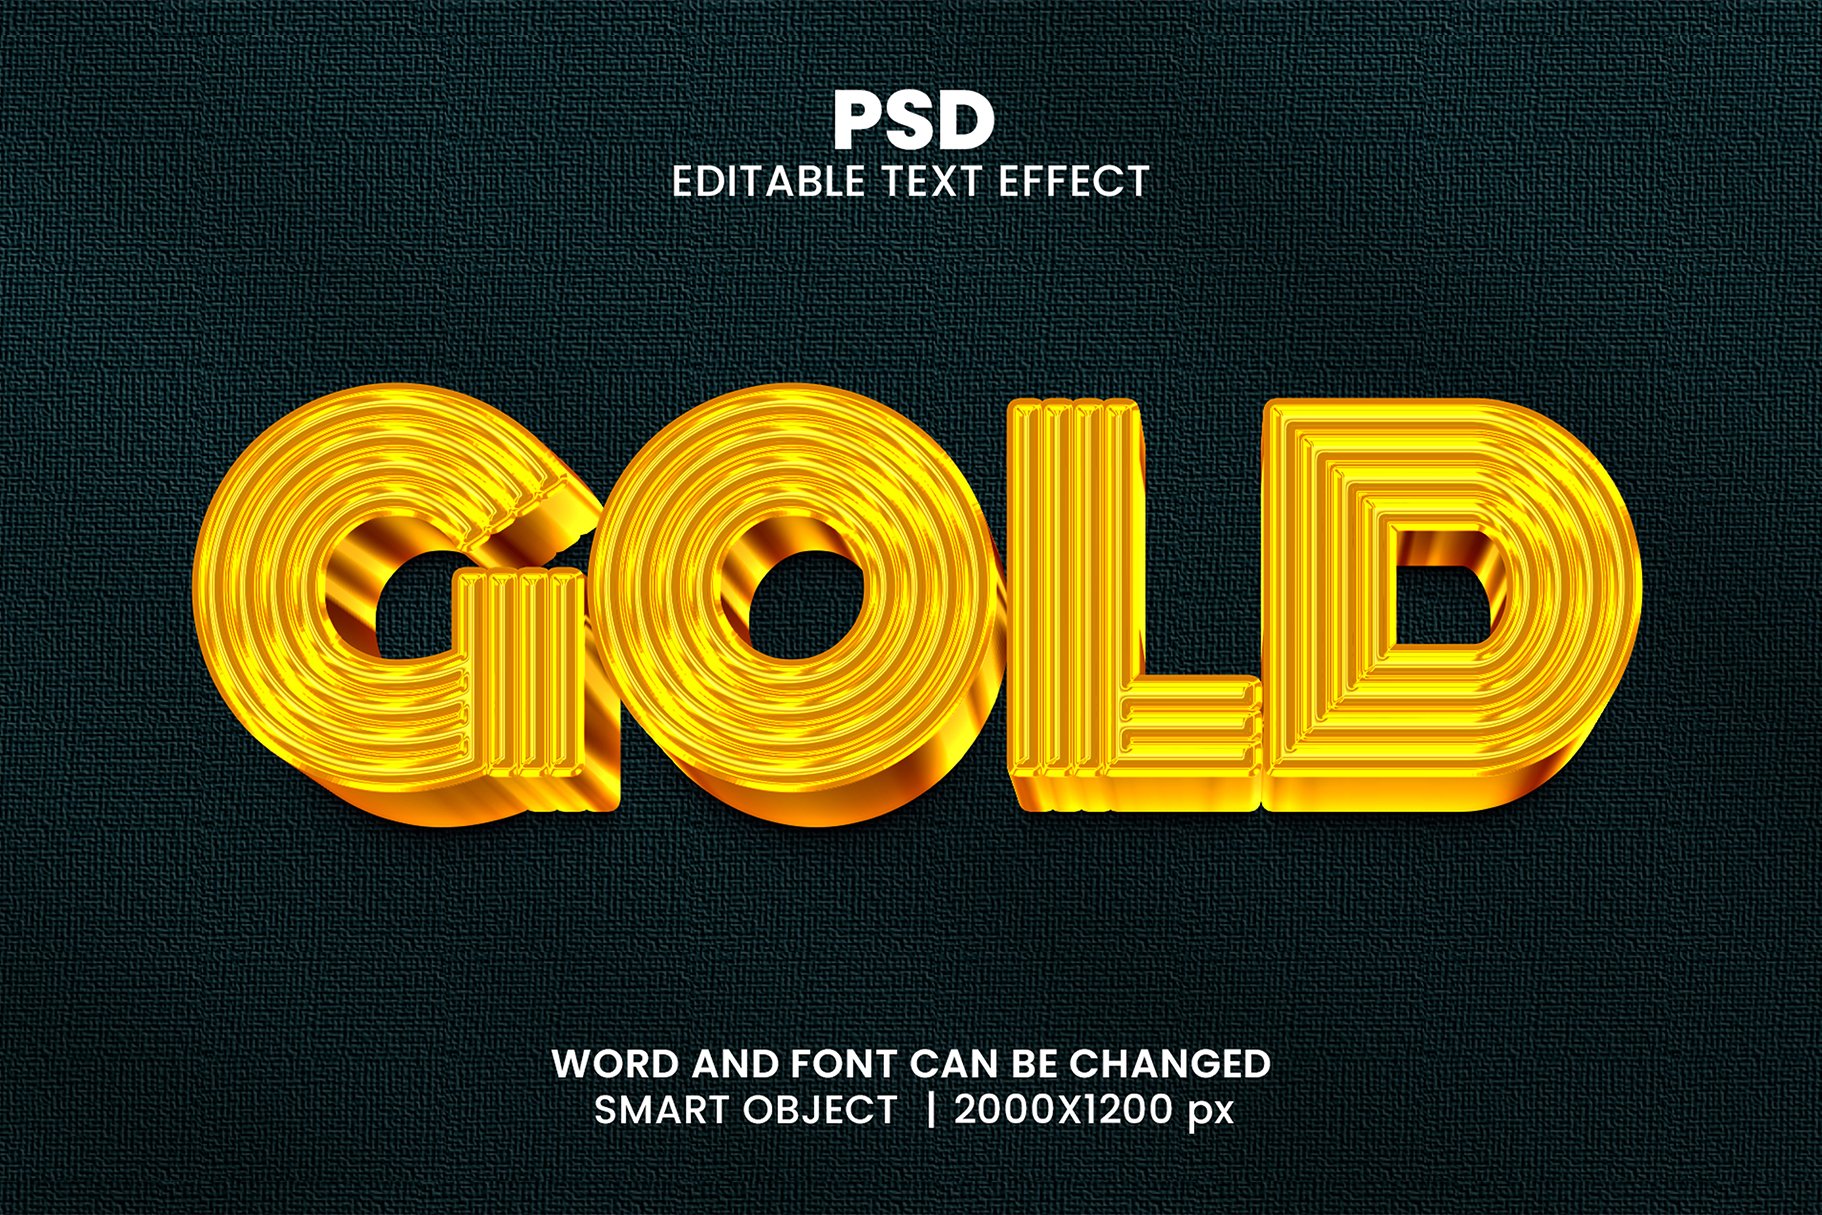 Gold 3D Text Effect PSDcover image.